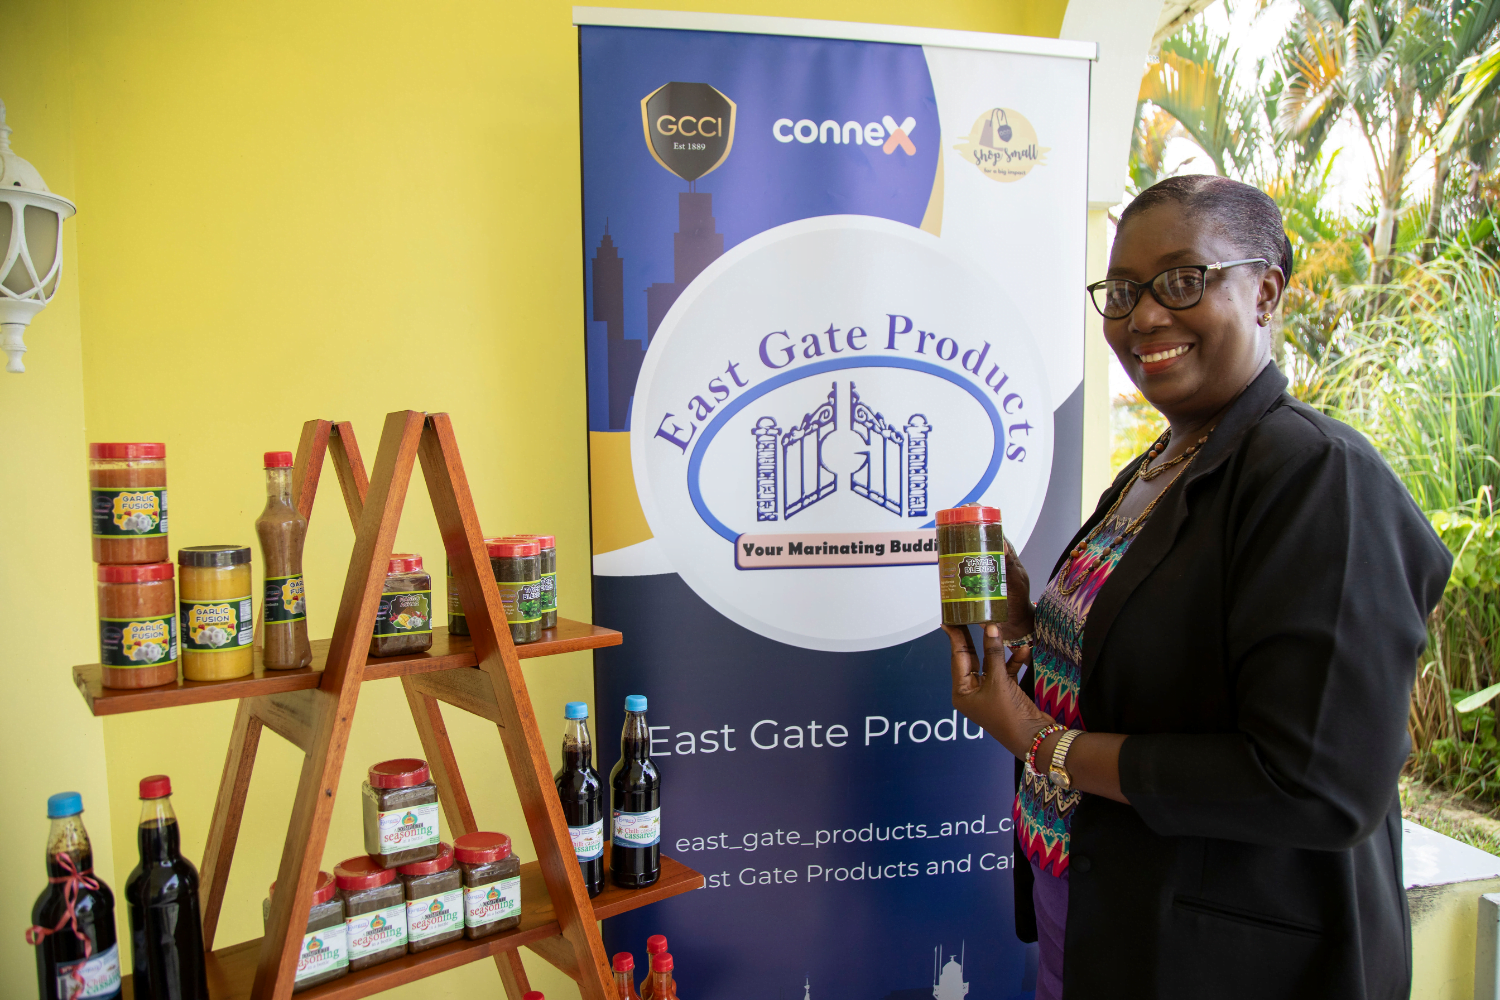 A Guyanese woman entrepreneur, Stacy Reece, stands in front of a blue and white banner sign that says East Gate Products and Café. She is smiling at the camera and holding one of her marinating sauces in a jar. Next to the banner sign is a wooden shelf with marinade sauces on it. She is wearing a top with a pink, blue and purple chevron pattern under a black blazer.